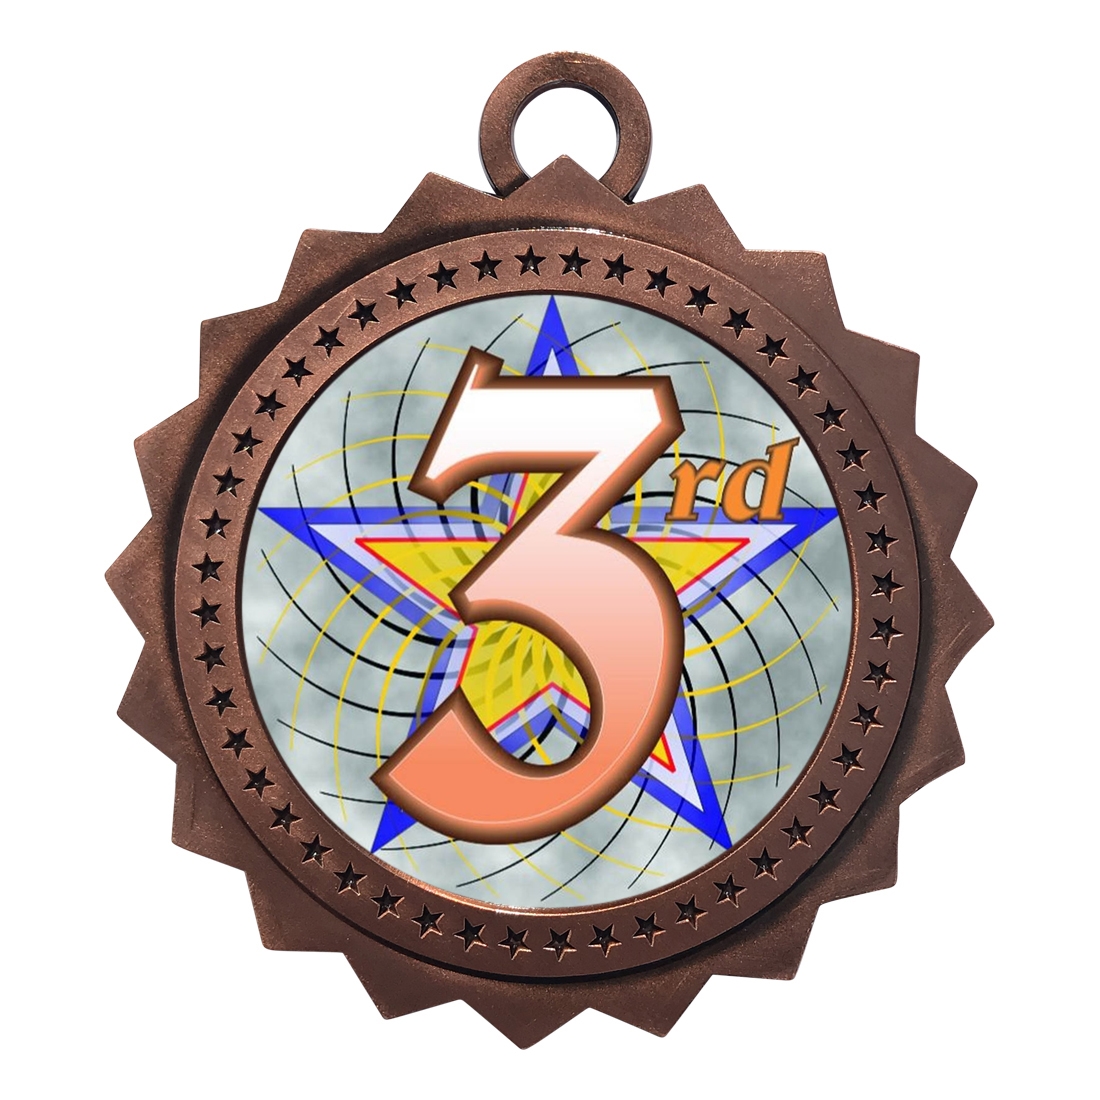 3" 3rd Place Medal (D03-FCL583)